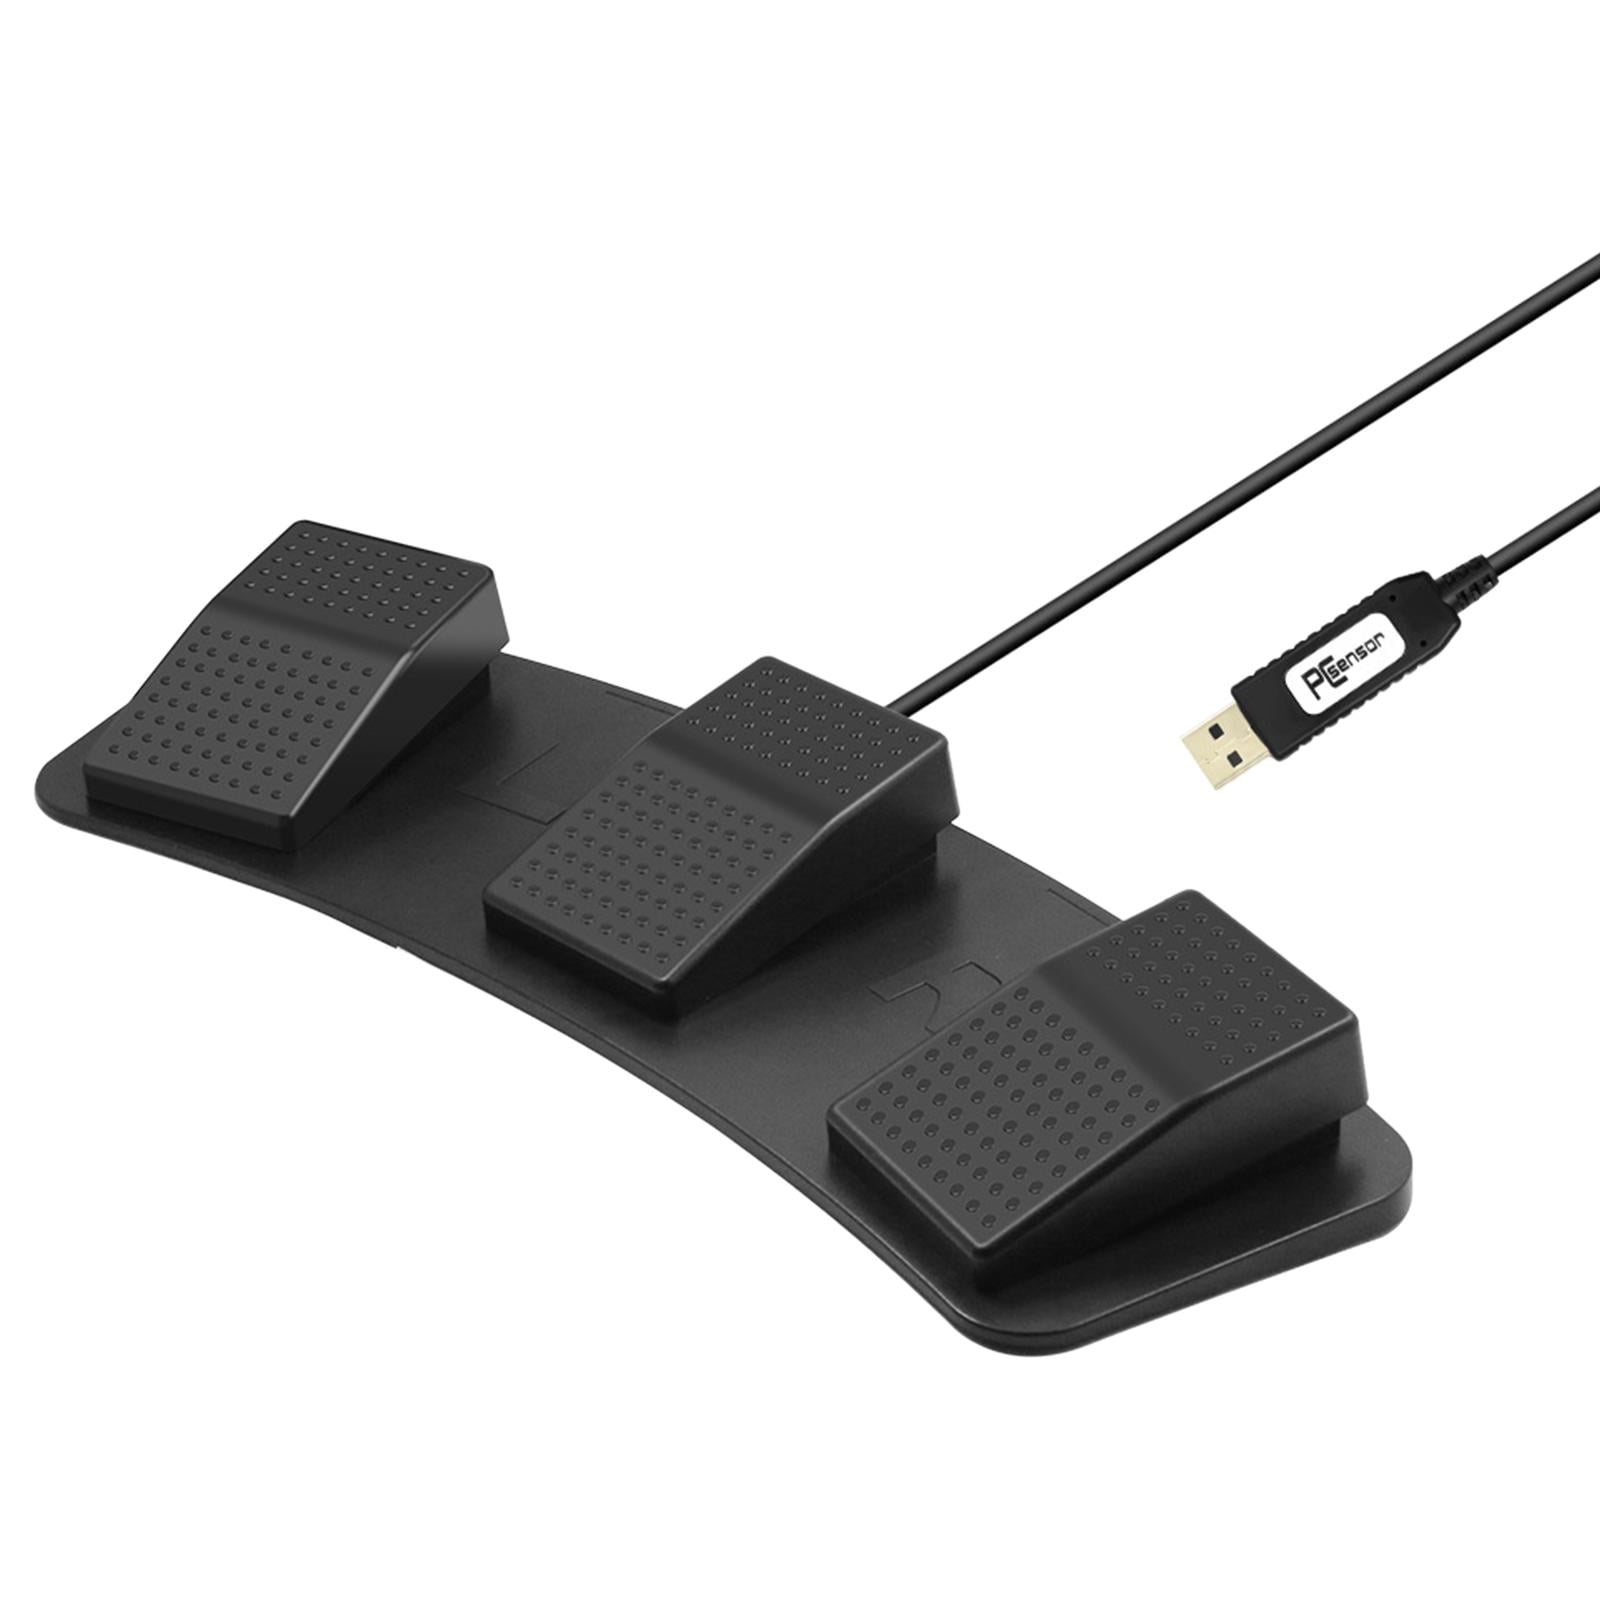 USB Triple Action Foot Switch Keyboard Control Foot Pedal for playing games 